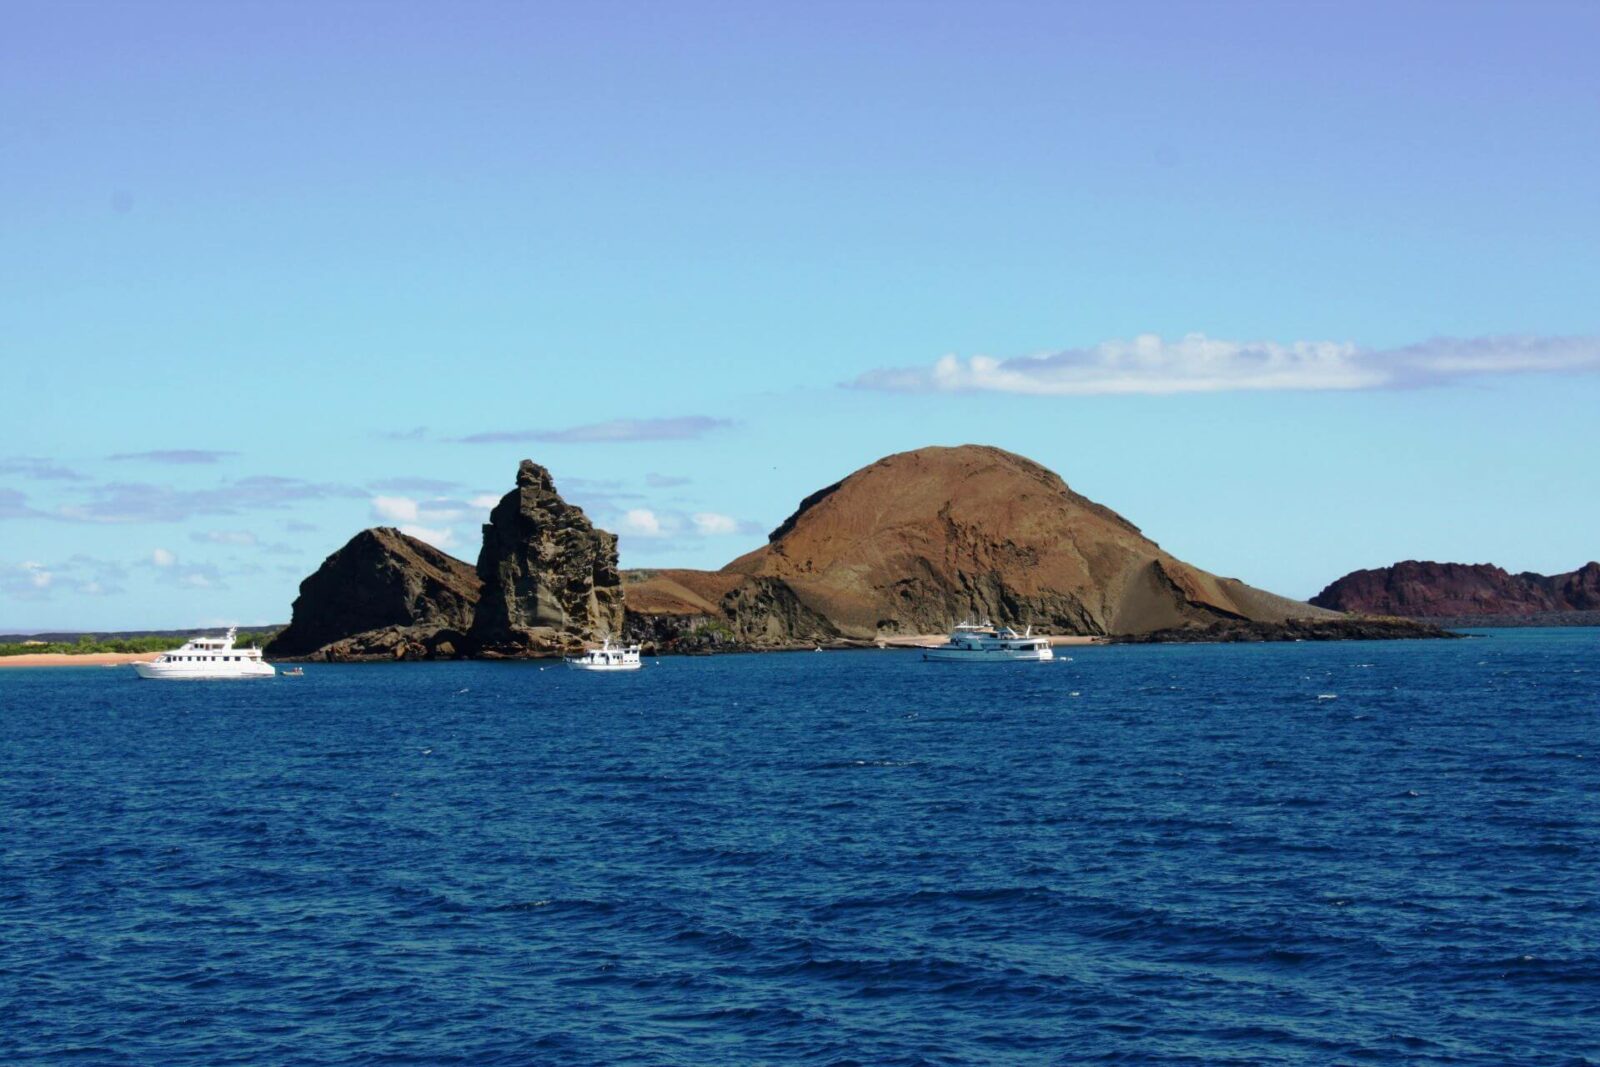 Brown rock formations in the Pacific Ocean surrounding the Galápagos Islands